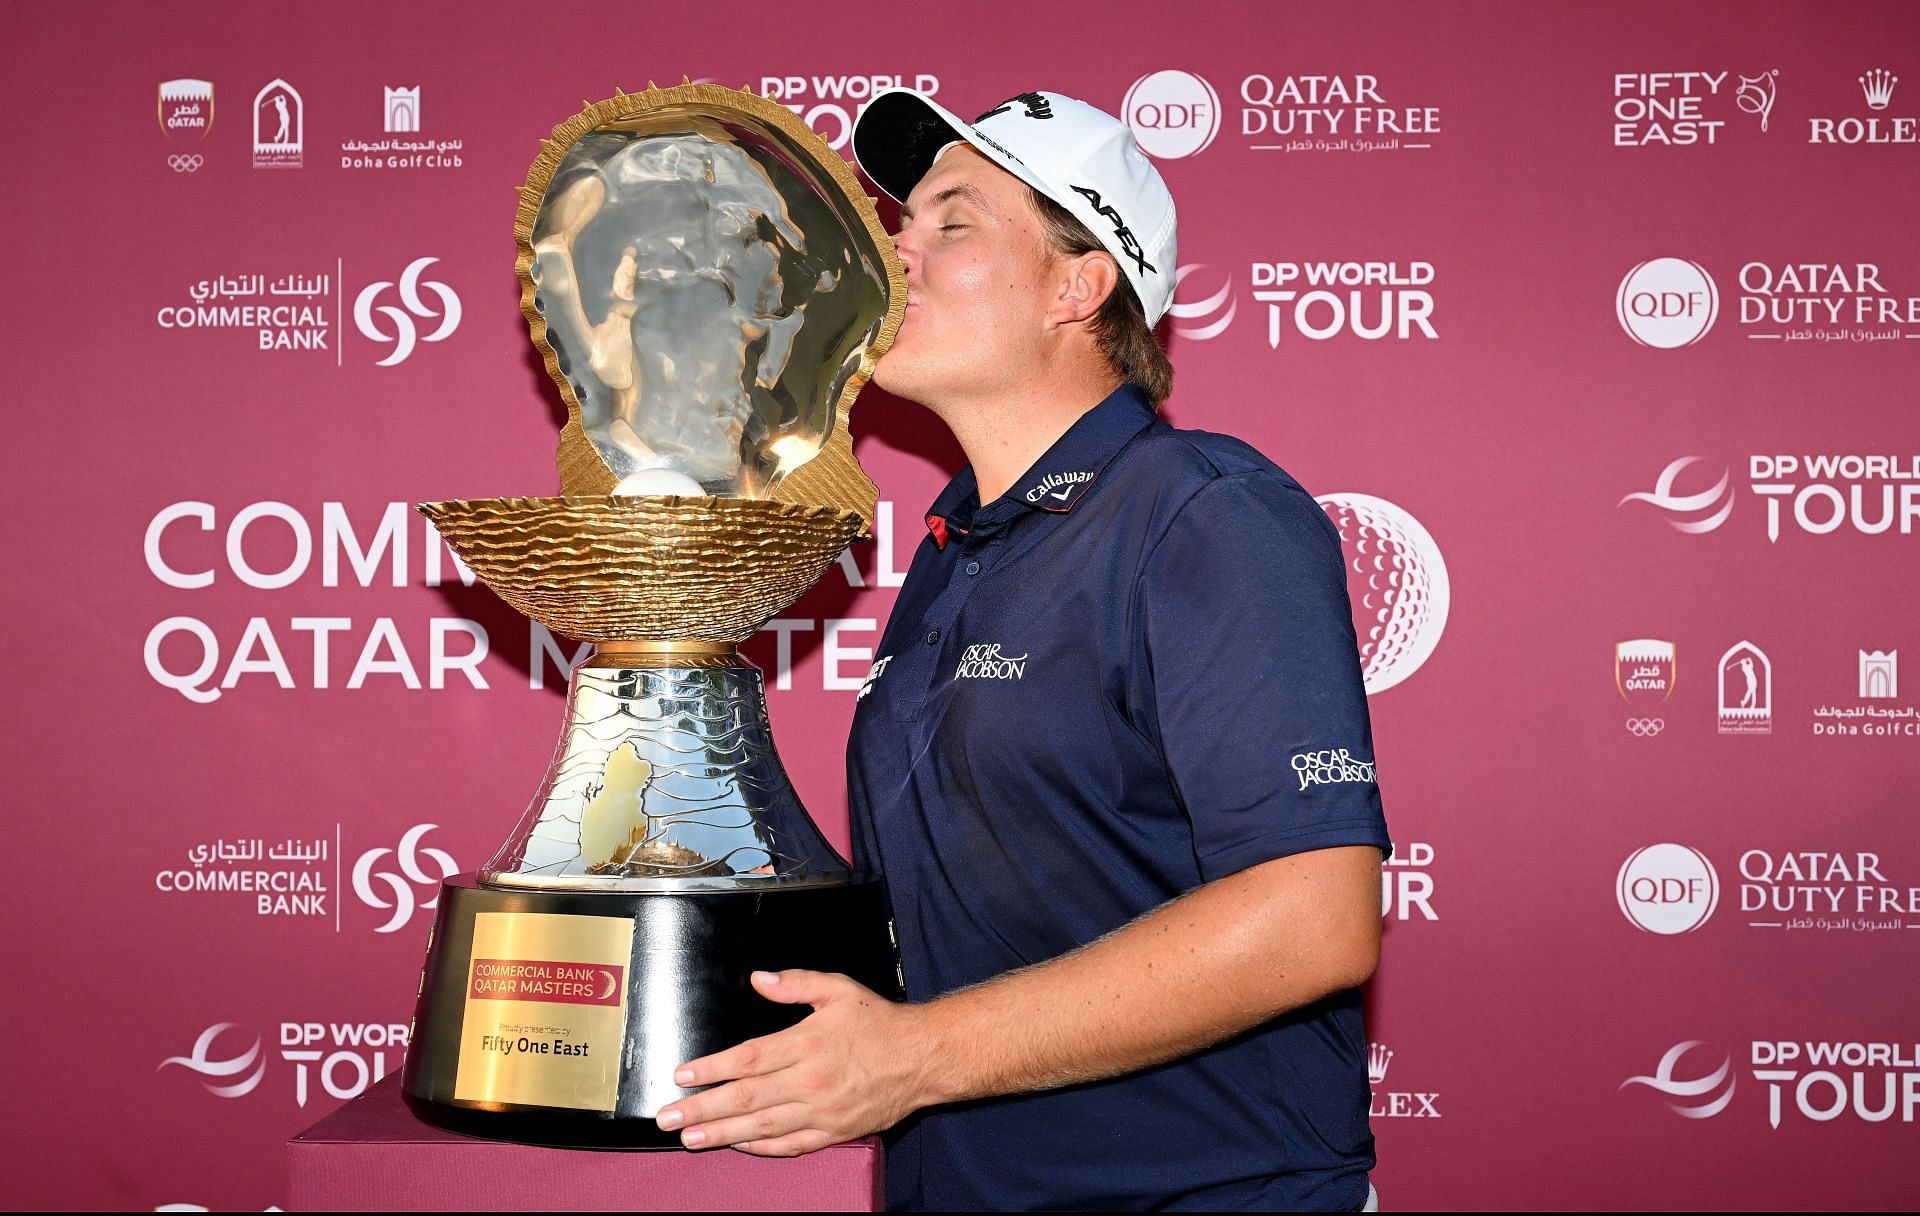 Commercial Bank Qatar Masters - Day Four